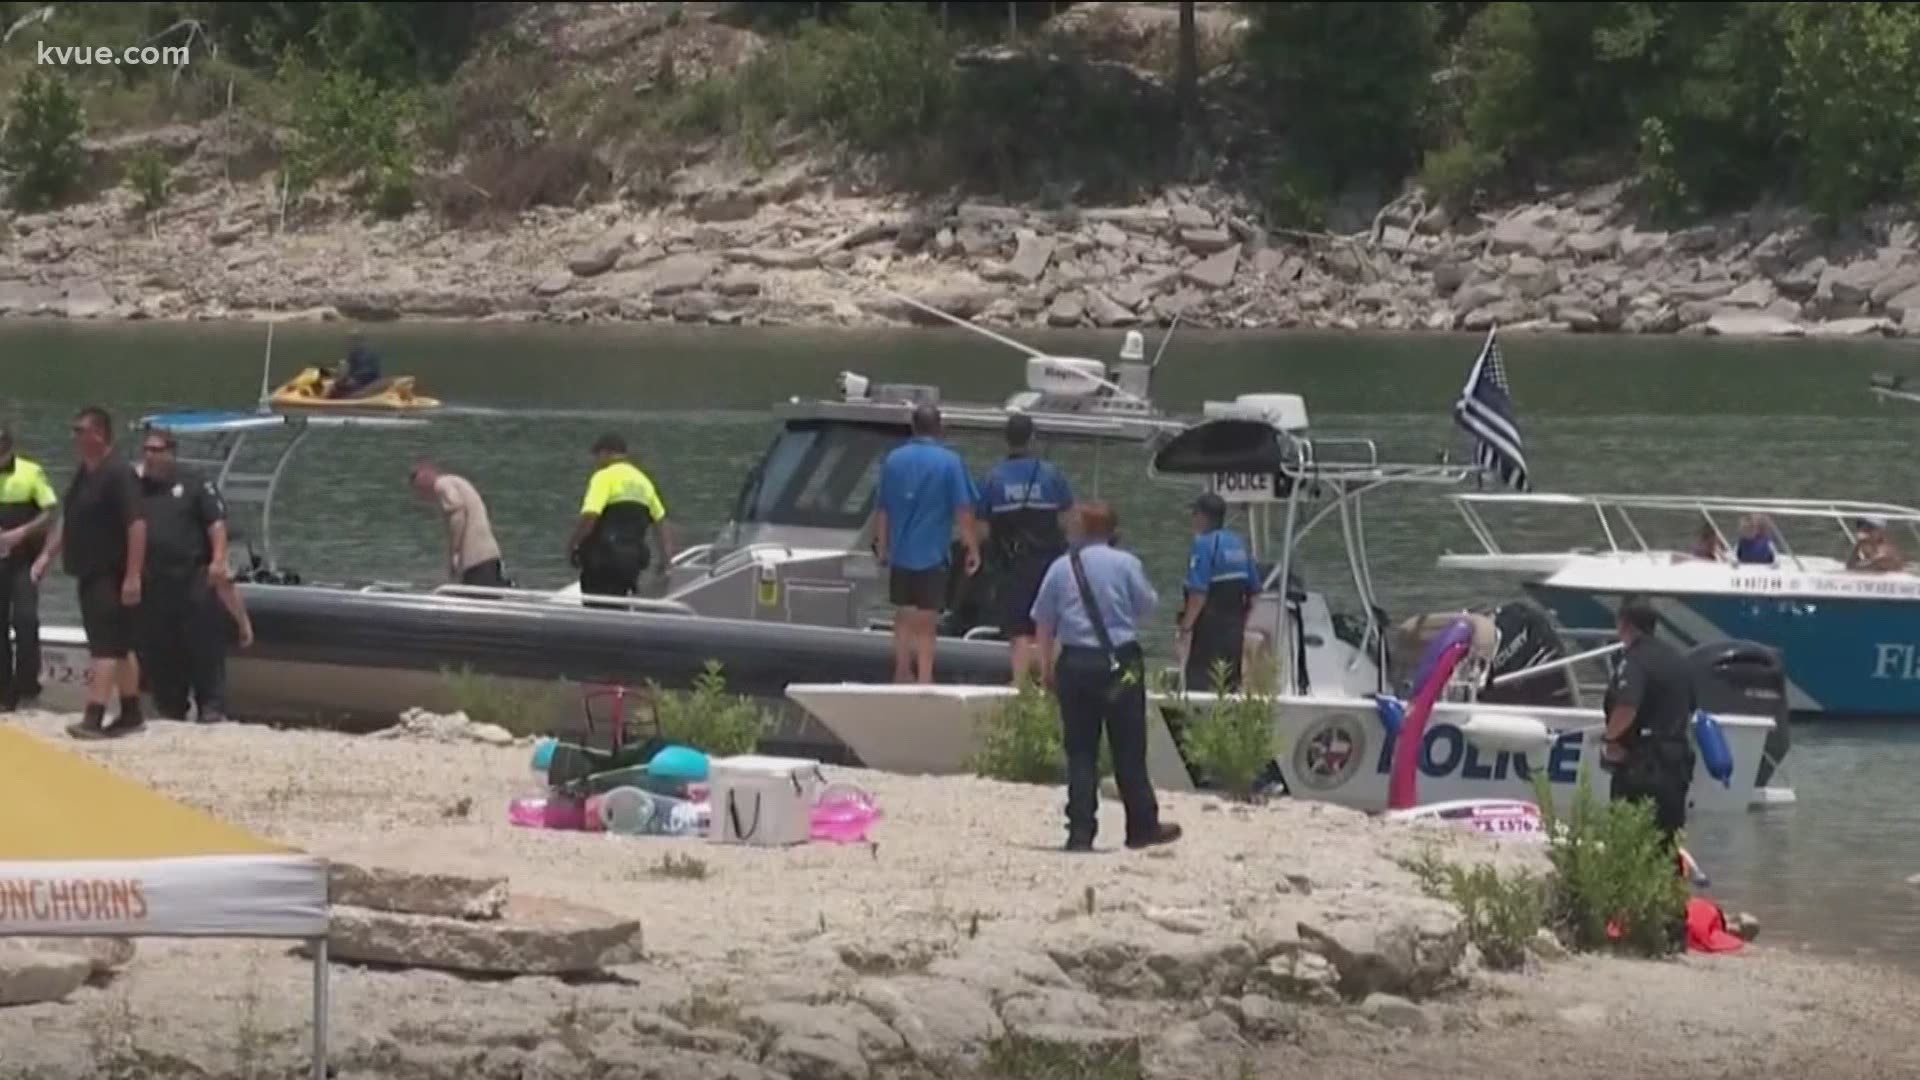 The Travis County Sheriff's Office has identified a swimmer who died at Jones Brothers Park on Lake Travis.